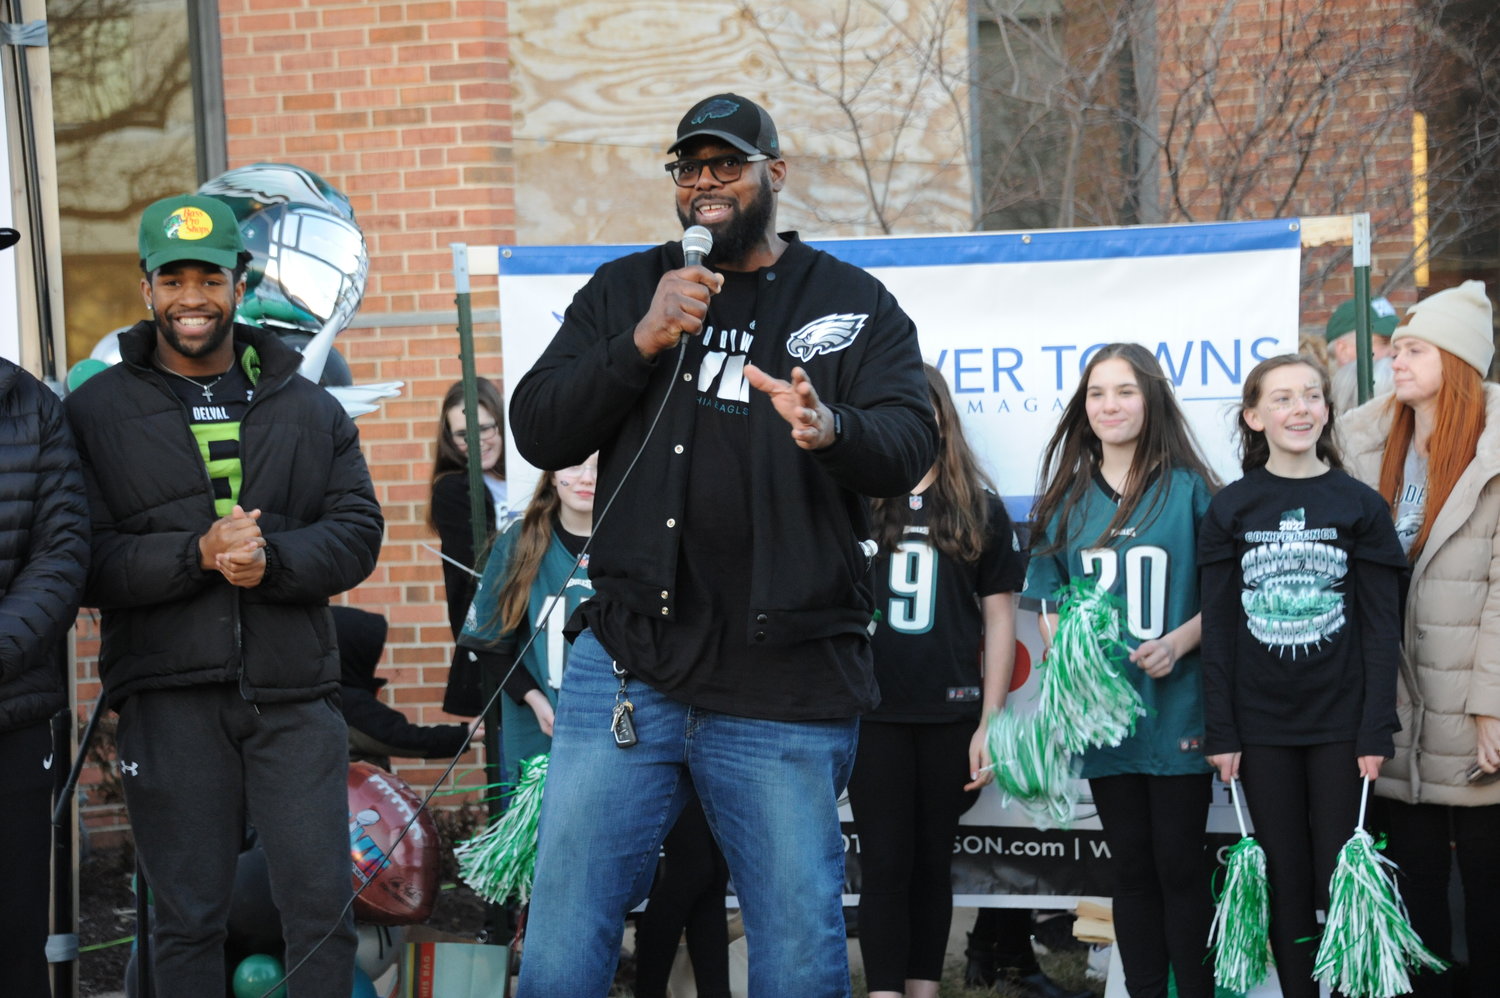 Former Eagles Pro Bowl offensive tackle Tra Thomas, who played 11 seasons and made three Pro Bowls in Philadelphia, fires up the crowd at the Herald’s “Bucks County Loves the Birds” pep rally on the lawn of the old county courthouse in Doylestown Friday evening.